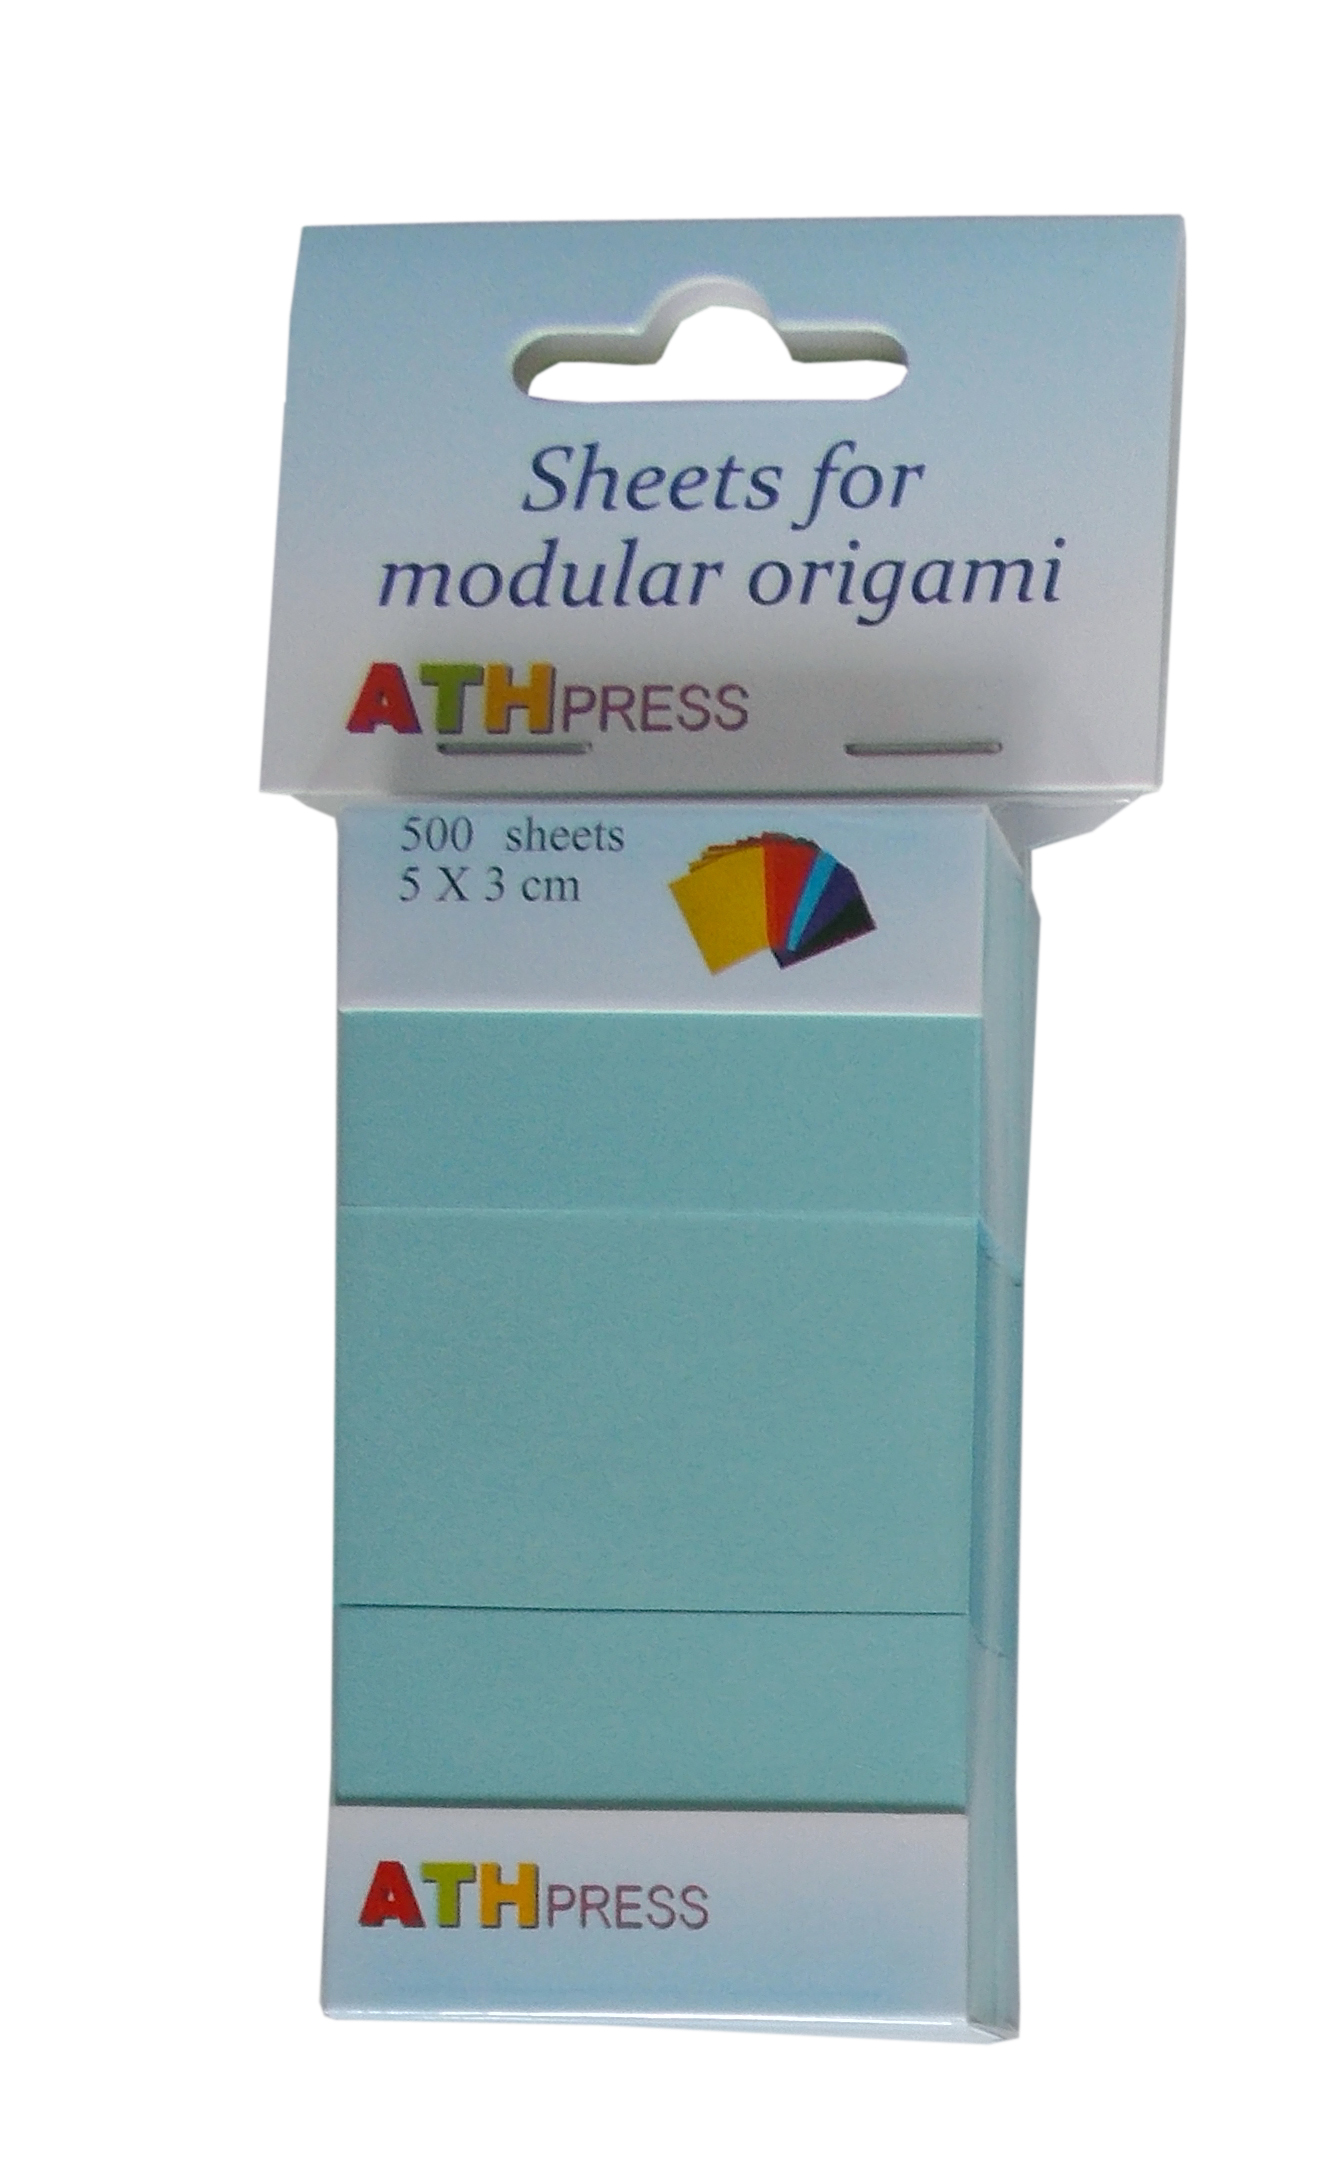 500 Sheets 5x3cm for 3D Origami - Chinese Modular purple - medium blue